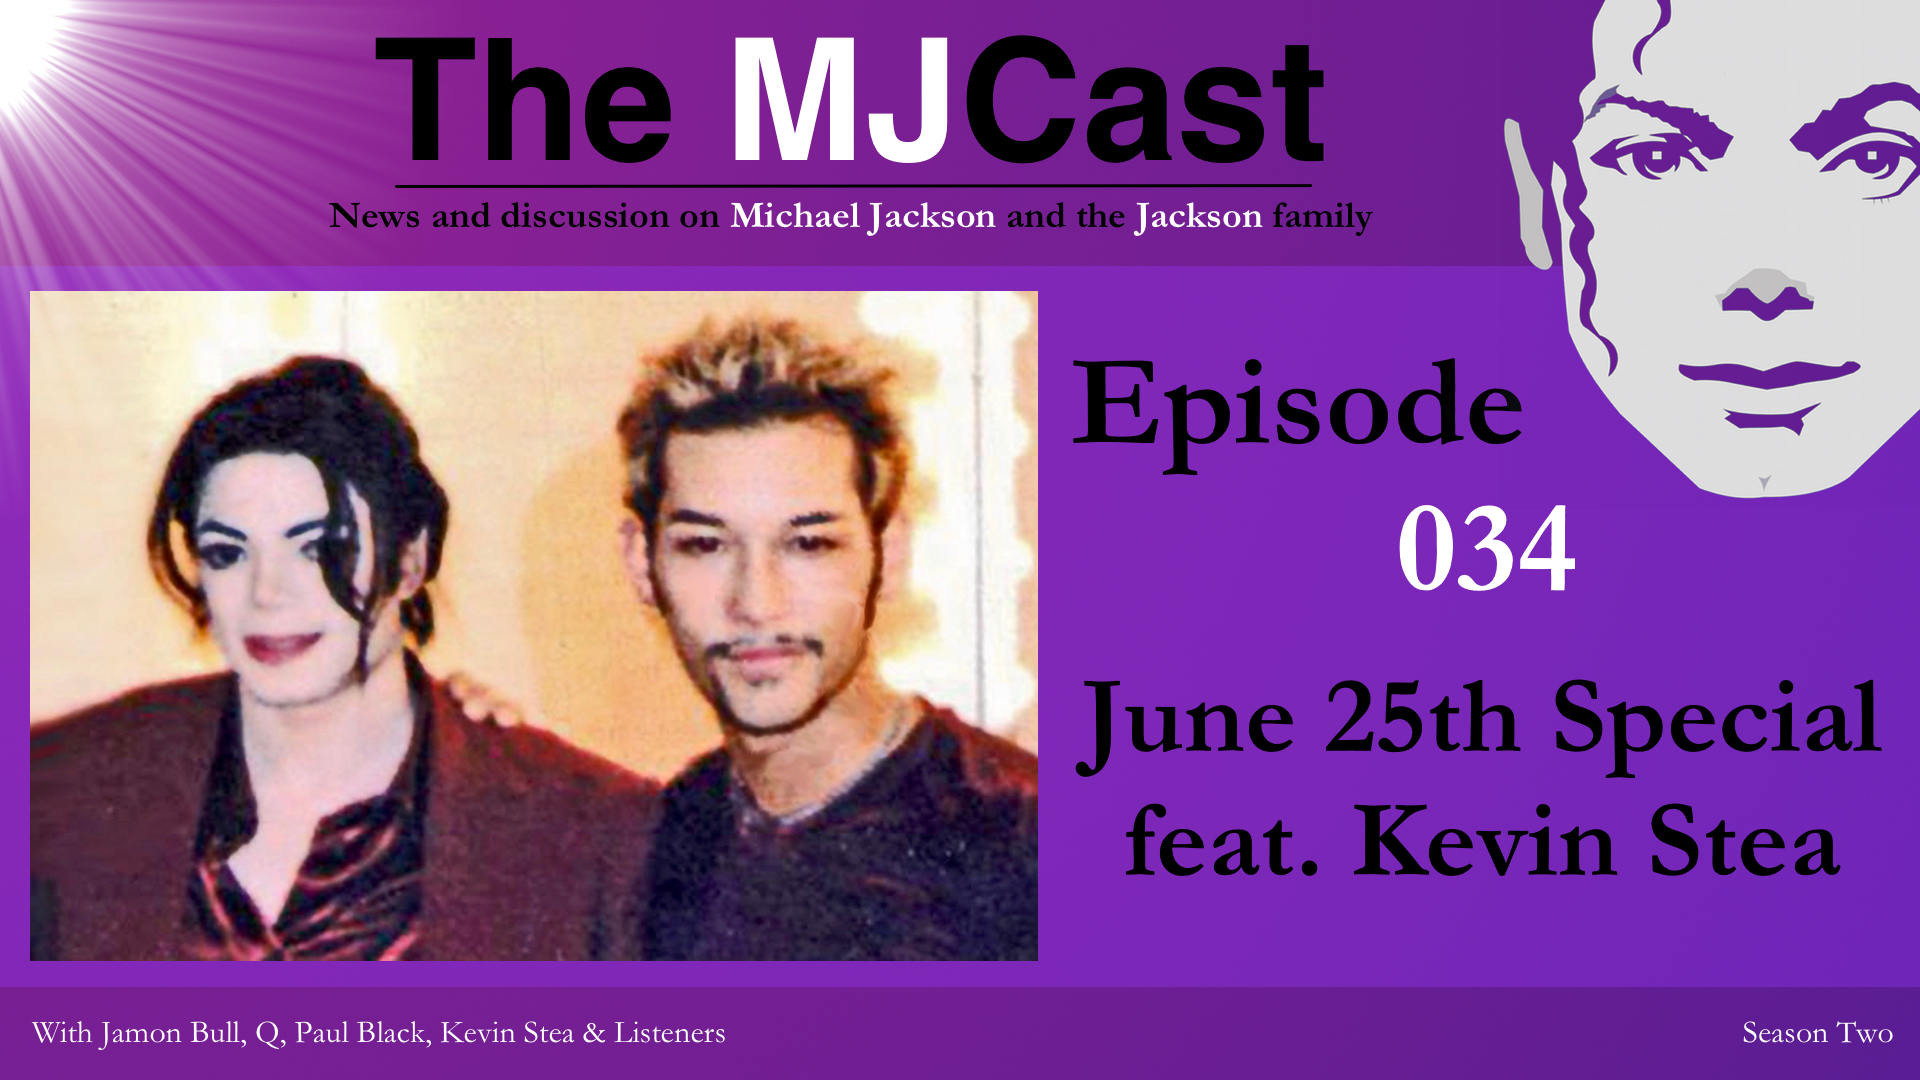 Episode 034 - June 25th Special feat. Kevin Stea Show Art